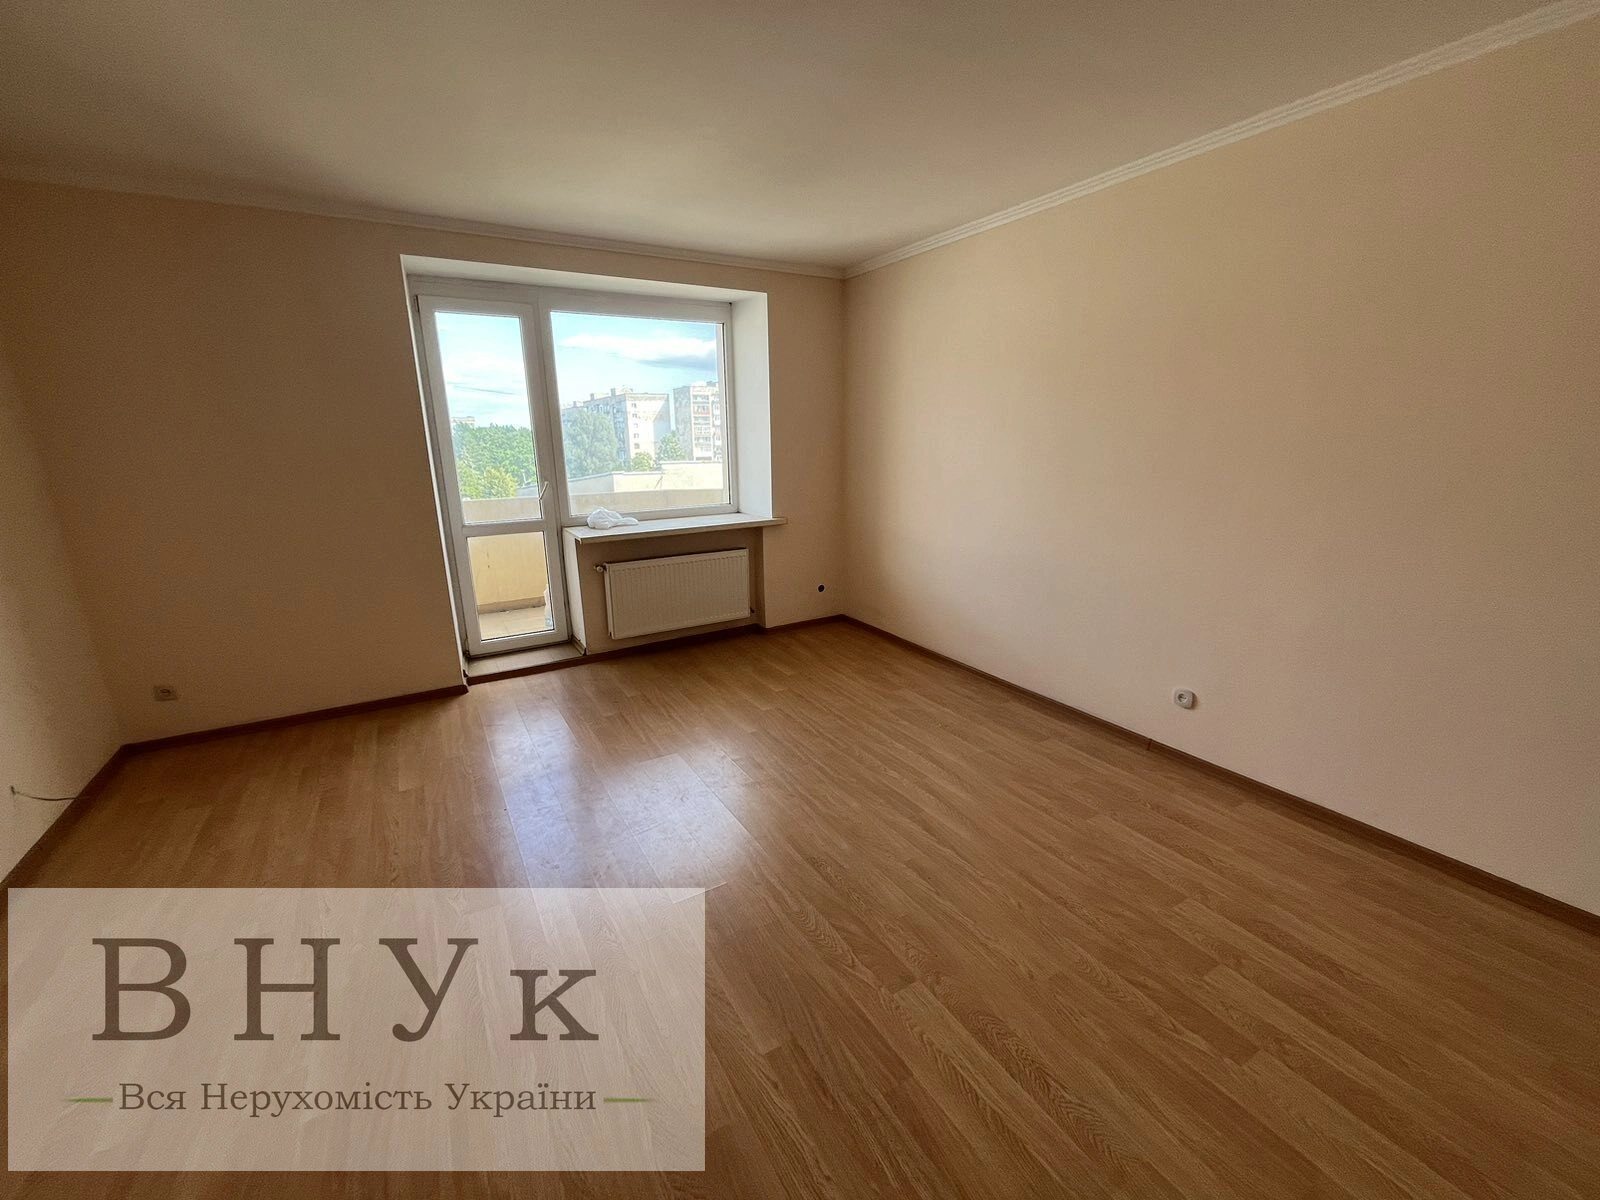 Apartments for sale. 1 room, 43 m², 4th floor/9 floors. Bandery S. vul., Ternopil. 